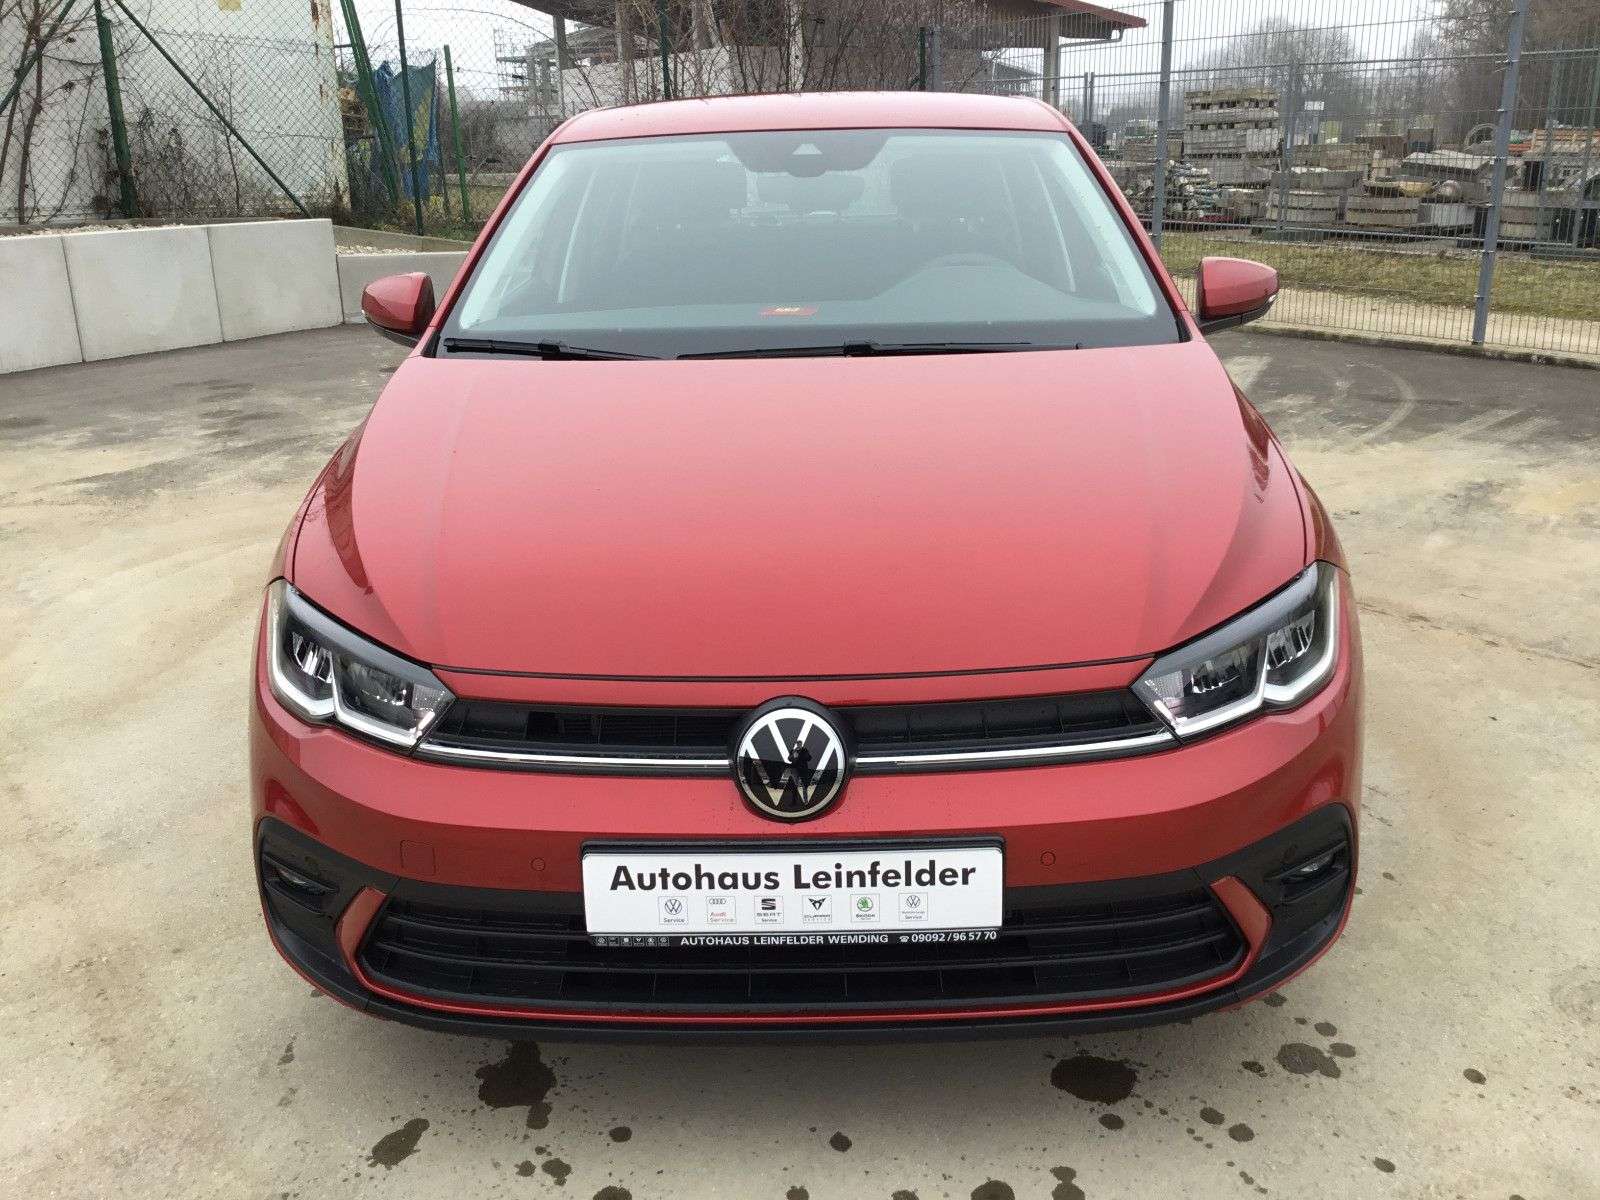 Volkswagen Polo Compact in Red pre-registered in Wemding for € 21,990.-